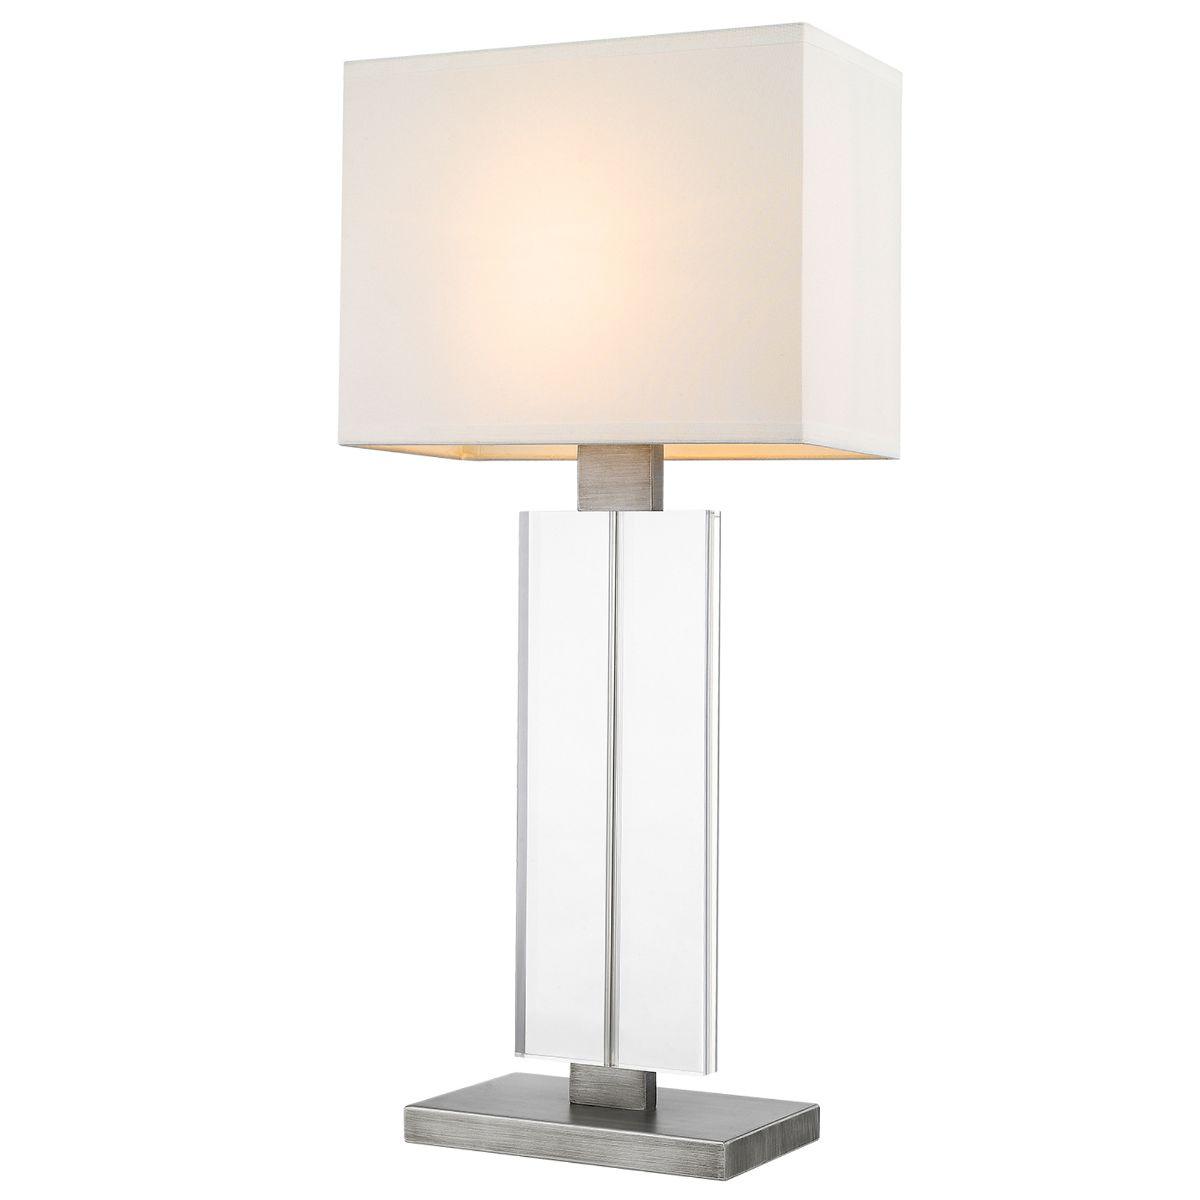 Shine 1 Light Table Lamp Acrylic Body and Hand Painted Weathered Pewter Finish